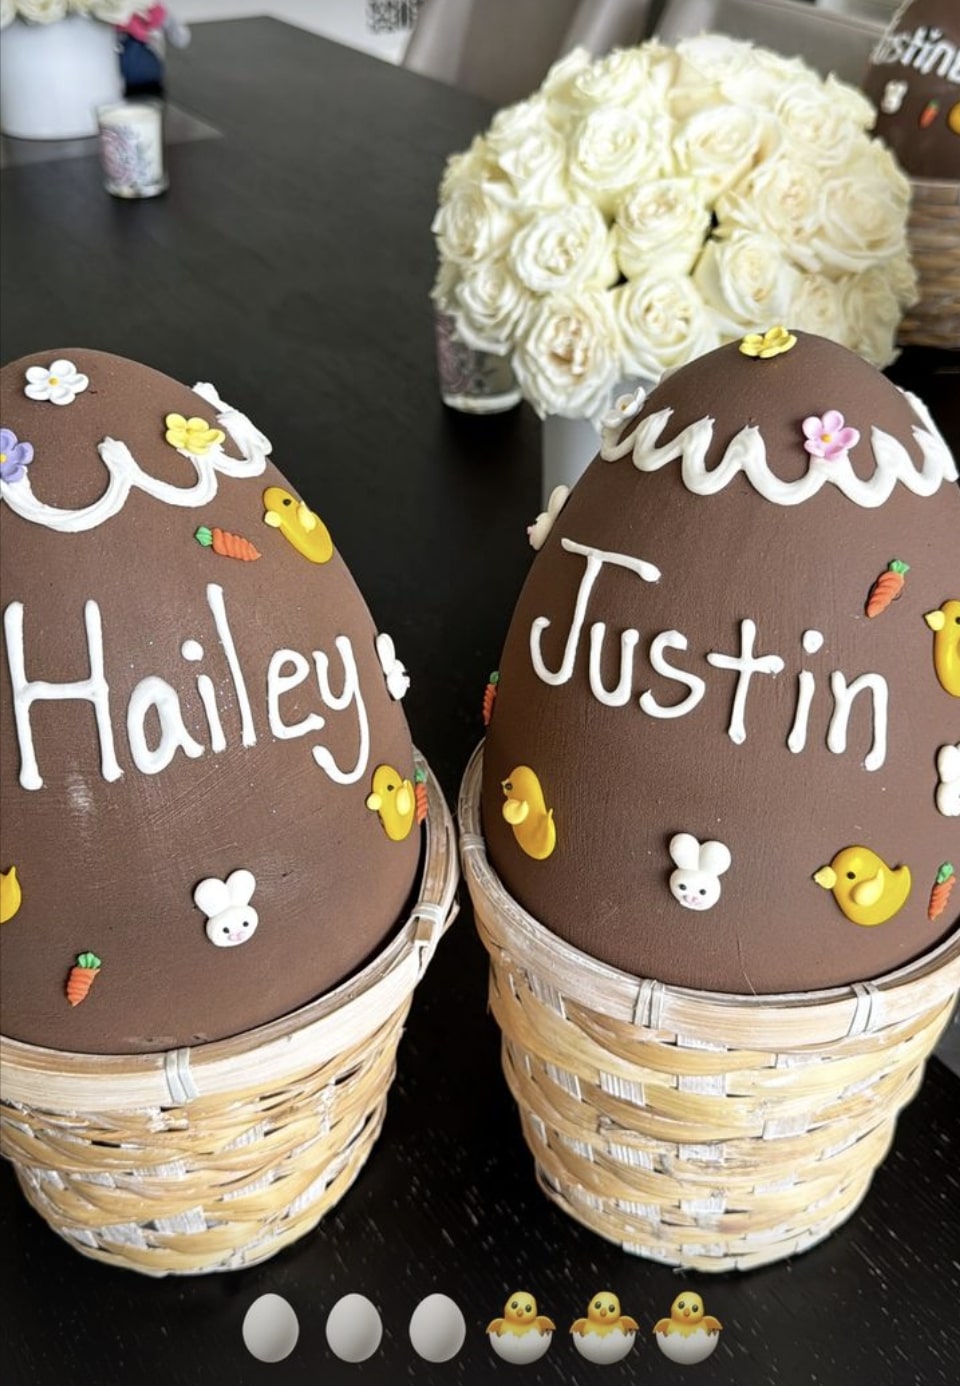 Hailey shared a photo of the Easter Eggs made for her and Justin